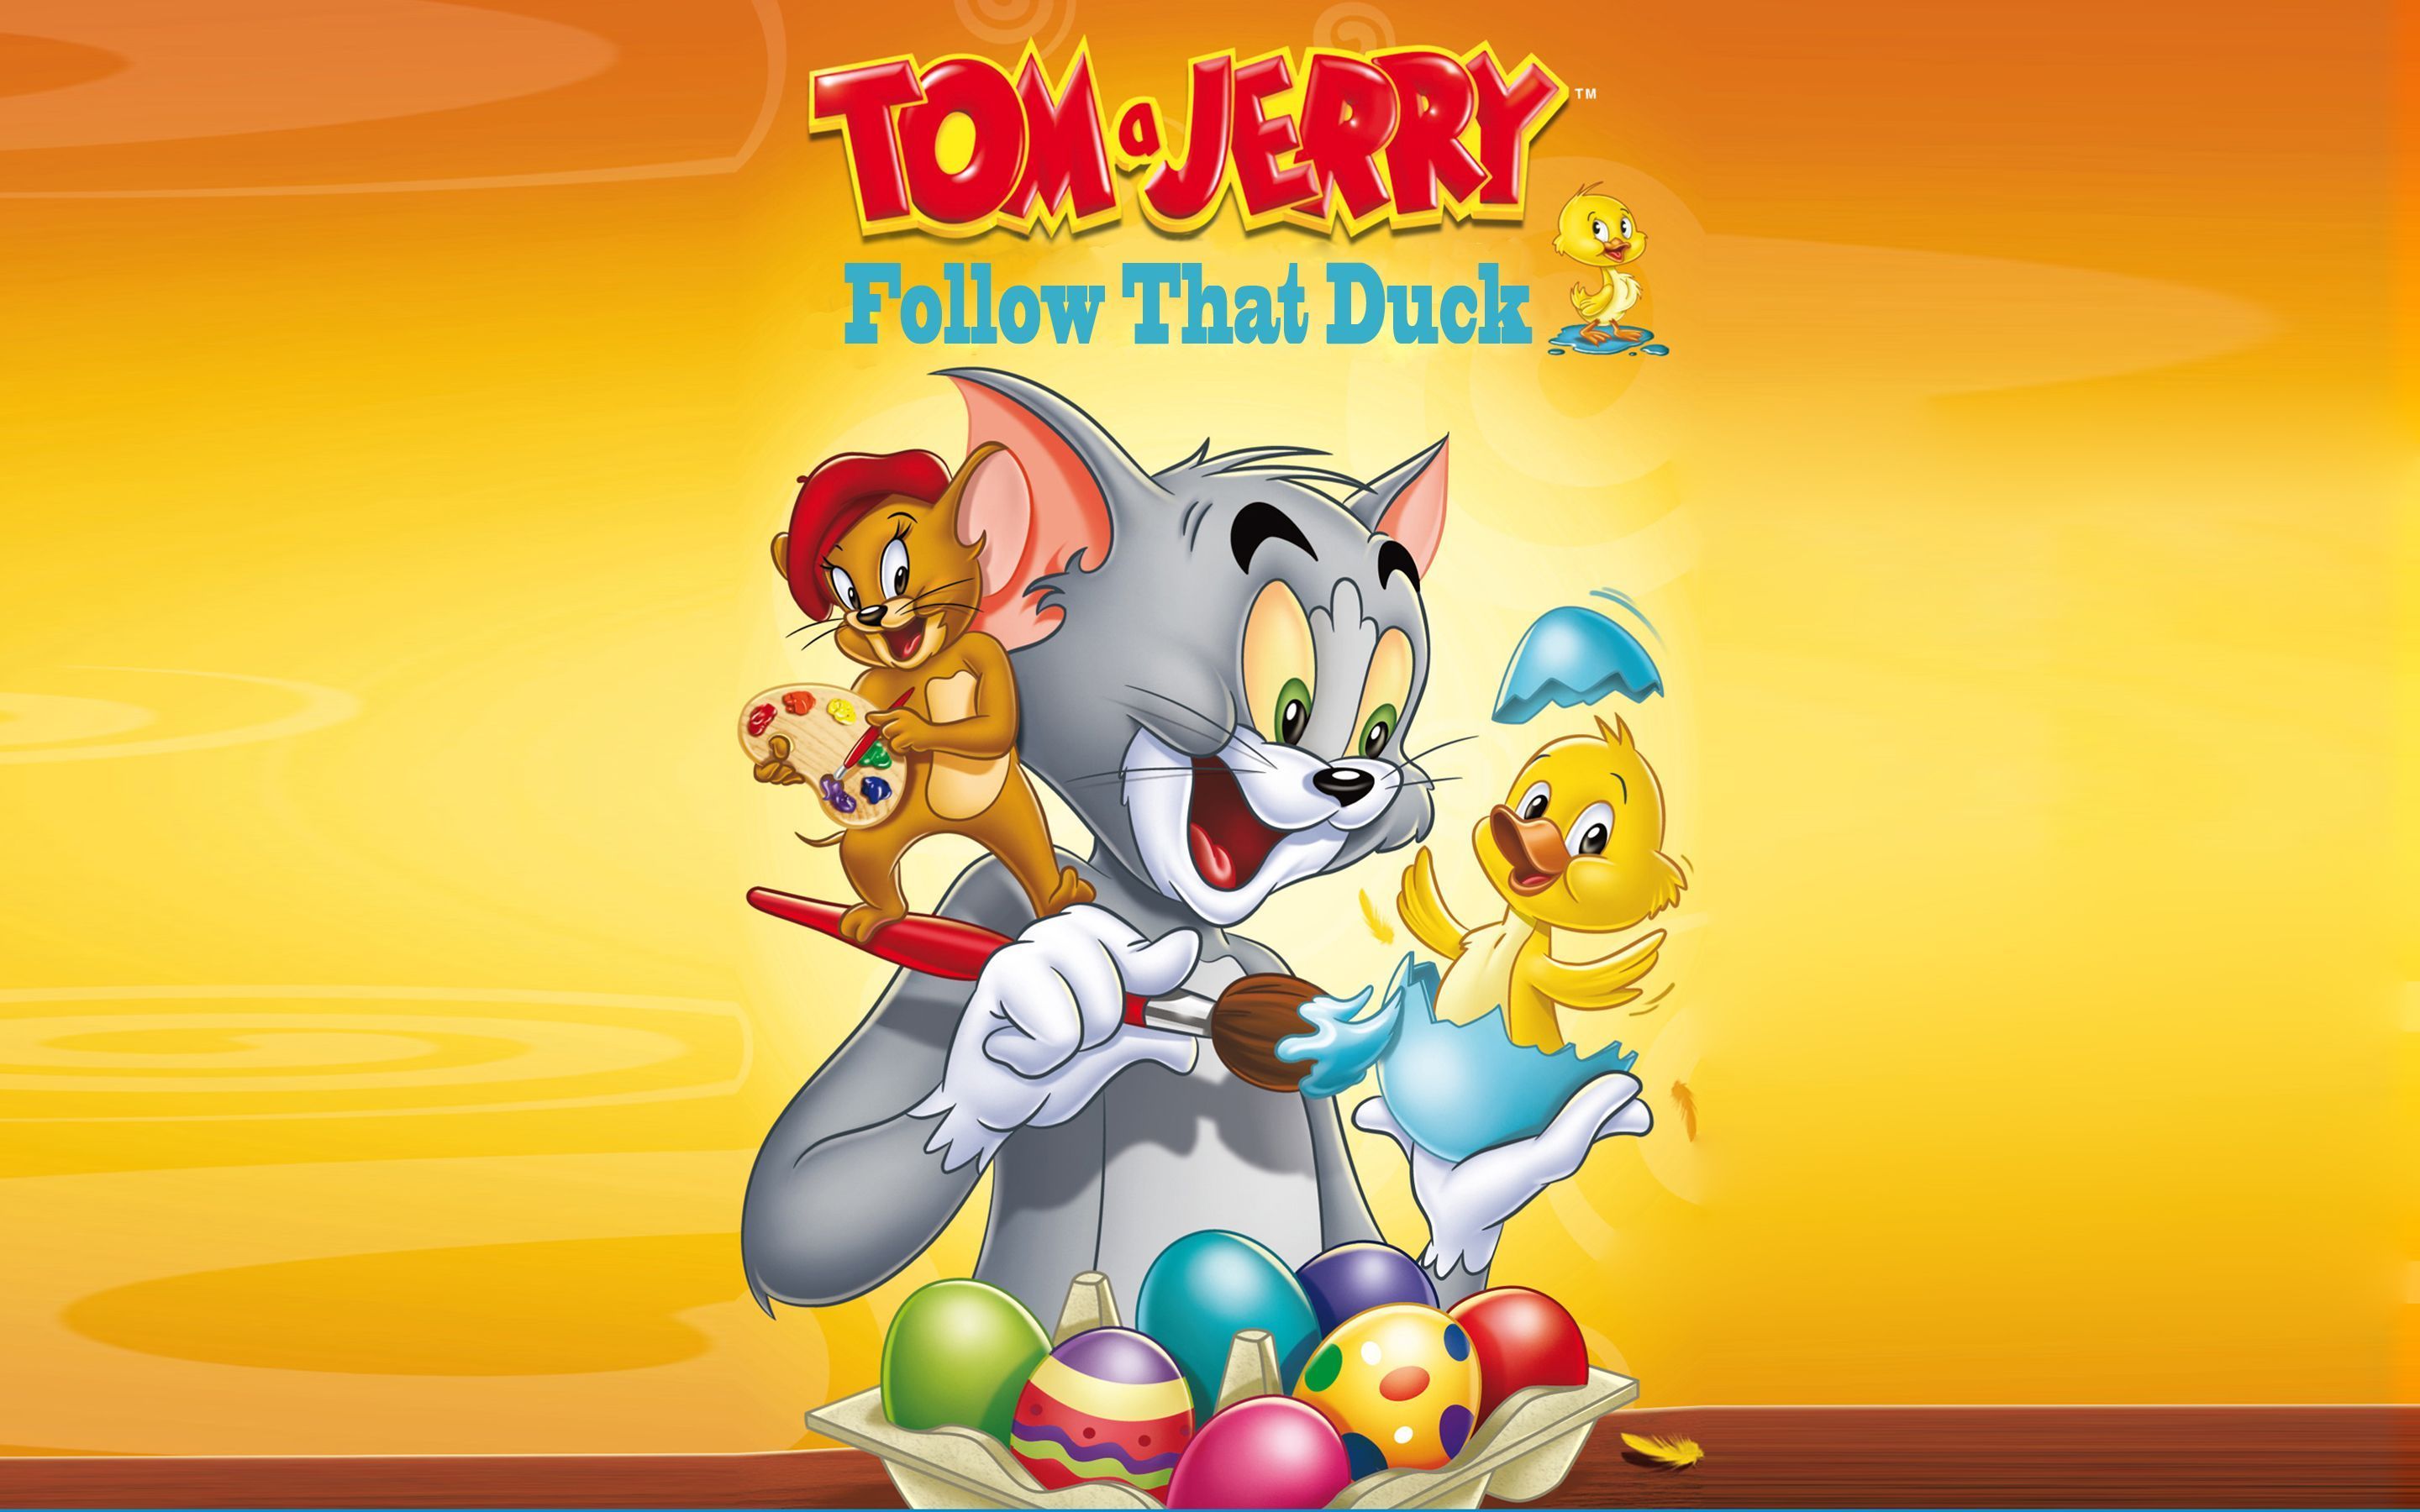 Tom and jerry fiddly that - Tom and Jerry